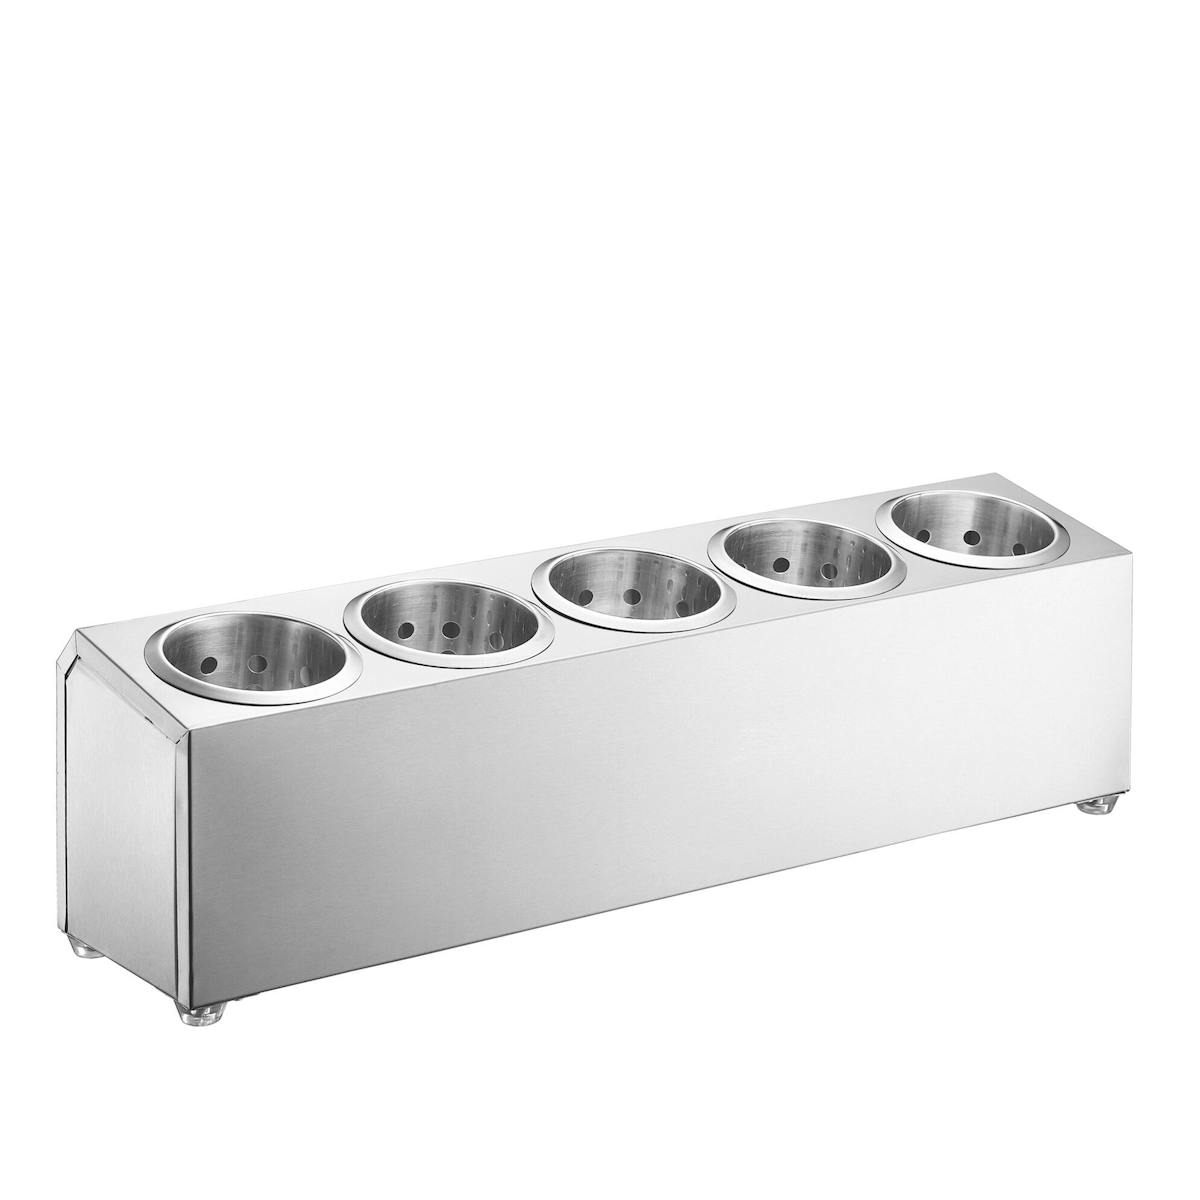 Cutlery tray - for 5 cutlery holders	